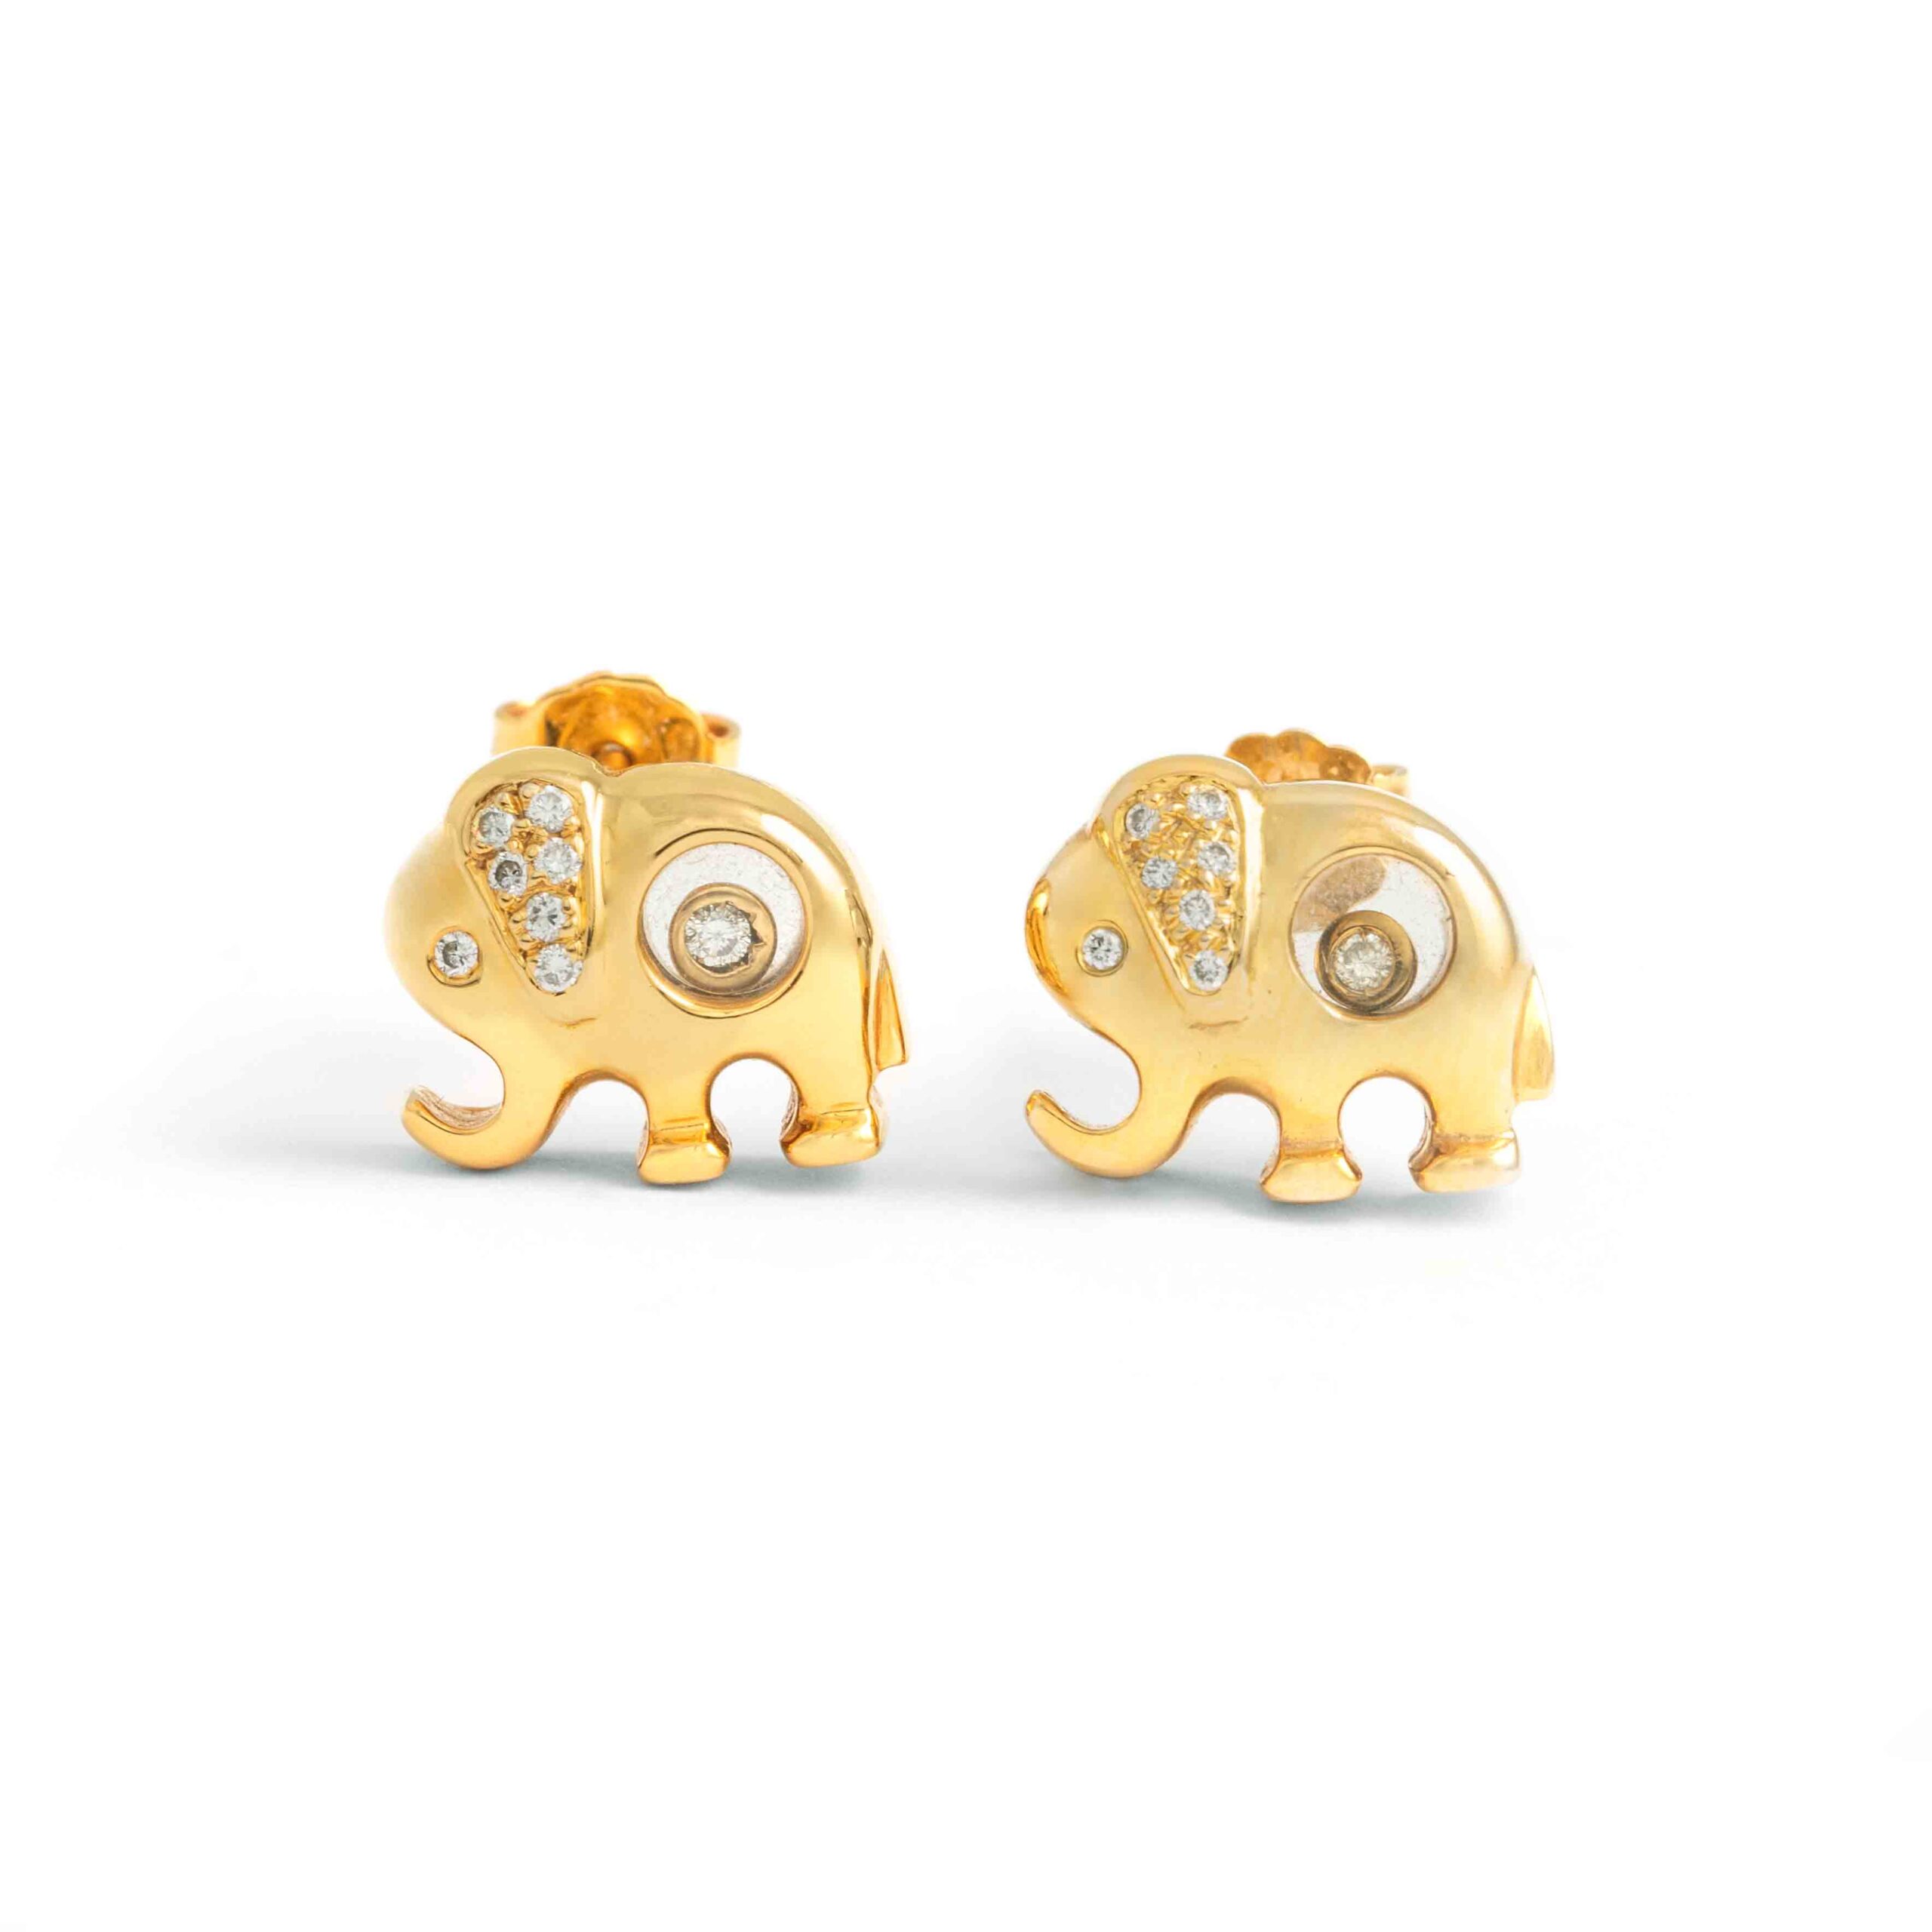 Elephant design, Diamond on Yellow Gold 18K Earrings. Dancing diamonds gently moving and twirling between two crystals. Size: 1.40 centimeters x 1.20 centimeters. Total weight: 9.57 grams.